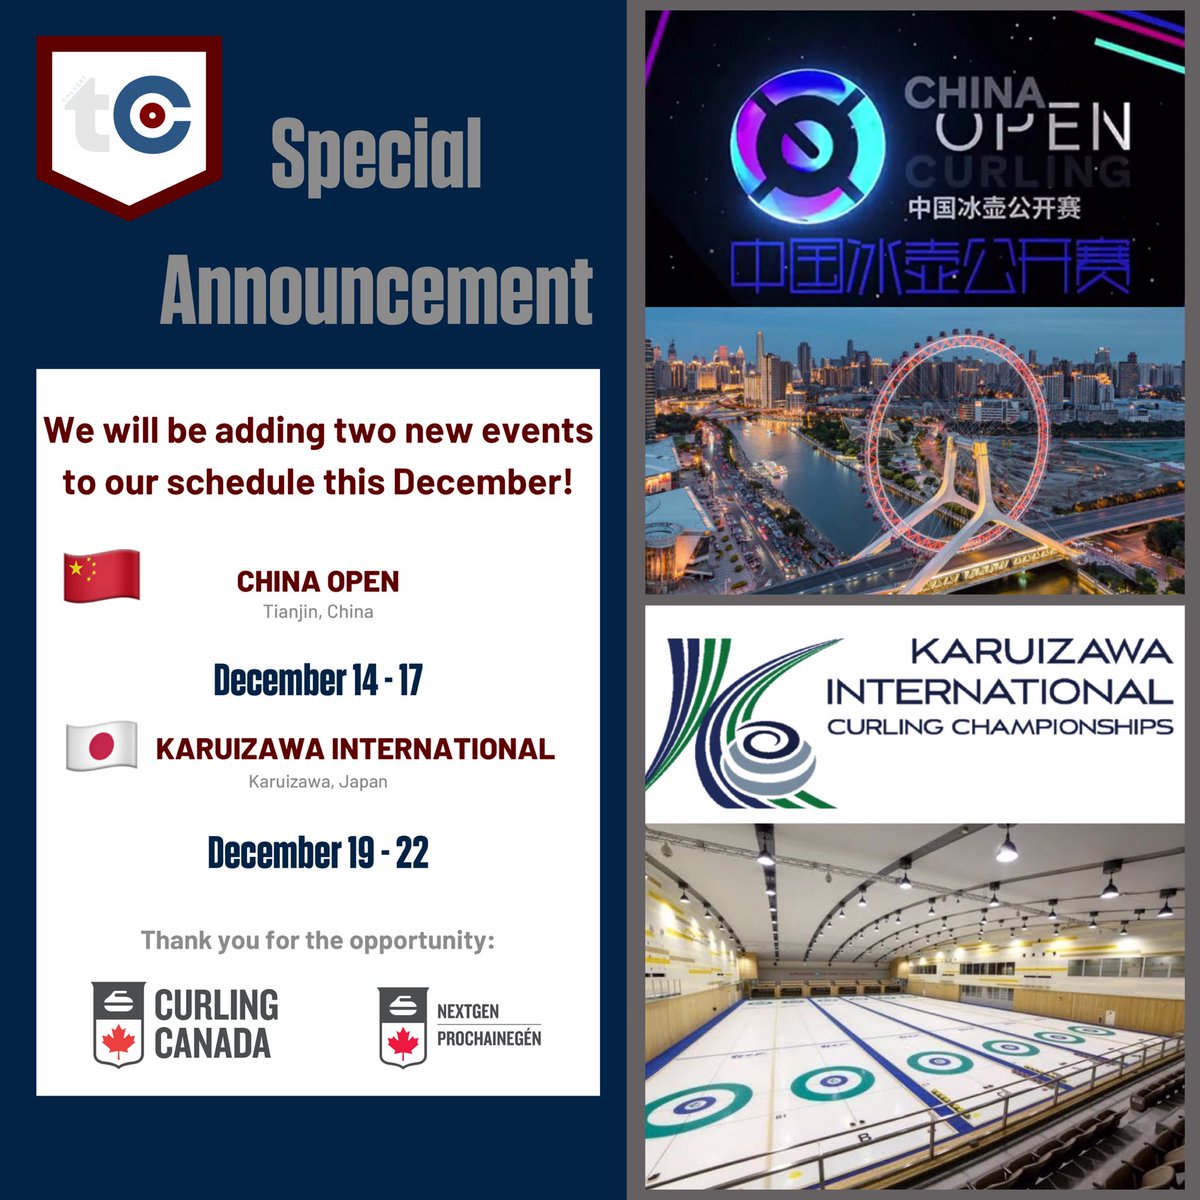 🚨UPDATE🚨

We are thrilled to announce the addition of two International events to our schedule.
🌎✈️🇨🇳🇯🇵

Thanks @curlingcanada for the opportunity! #ChinaOpen #karuizawainternational